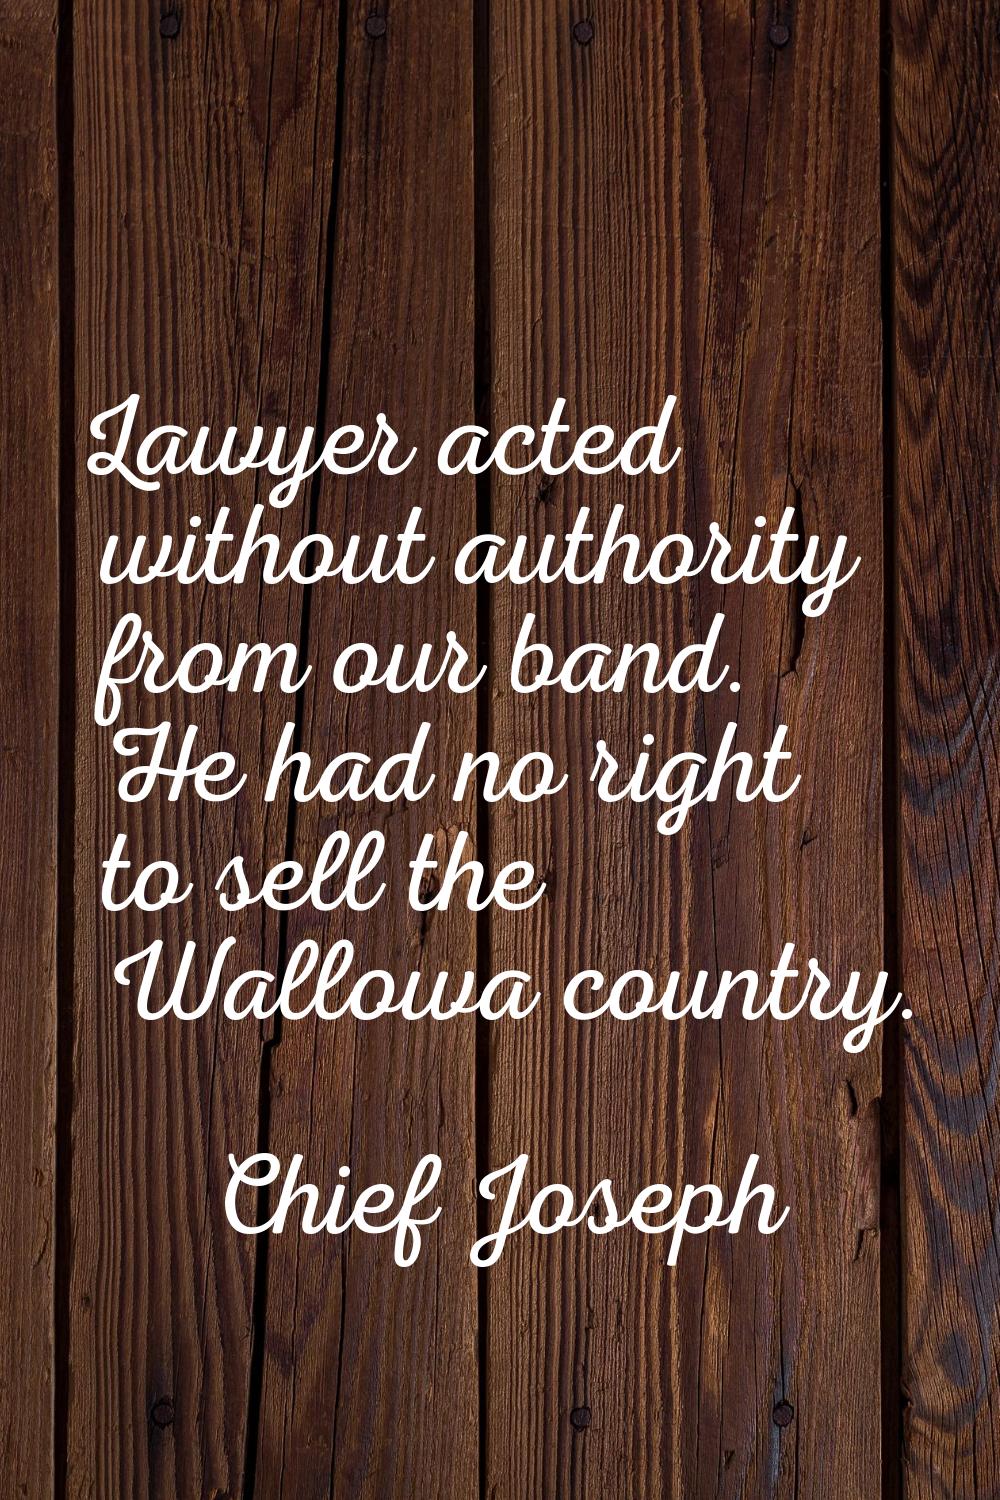 Lawyer acted without authority from our band. He had no right to sell the Wallowa country.